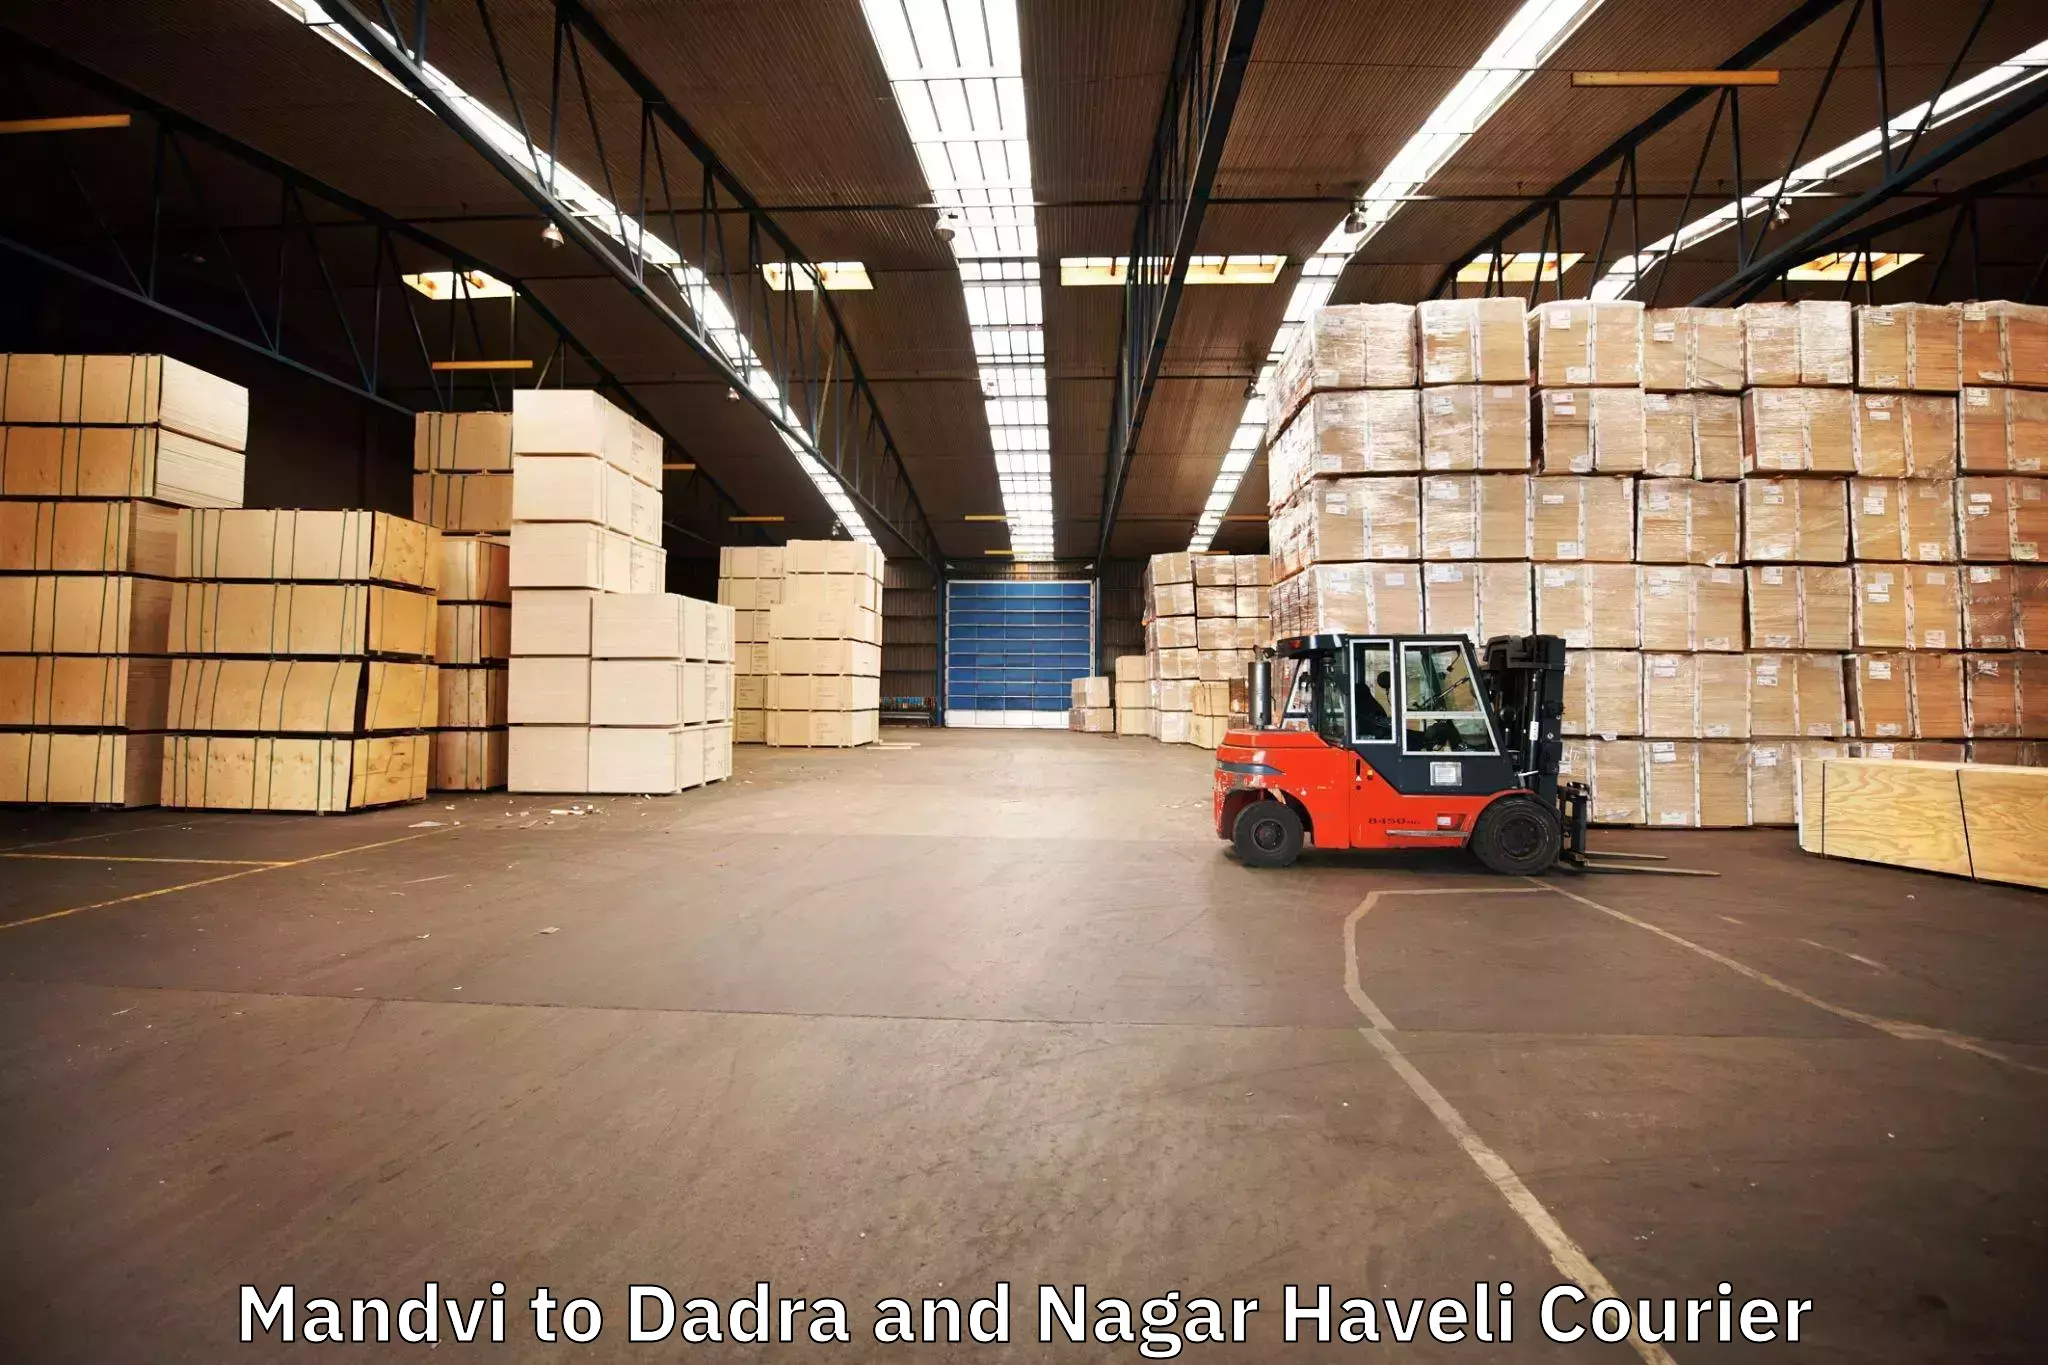 Trusted relocation experts Mandvi to Dadra and Nagar Haveli